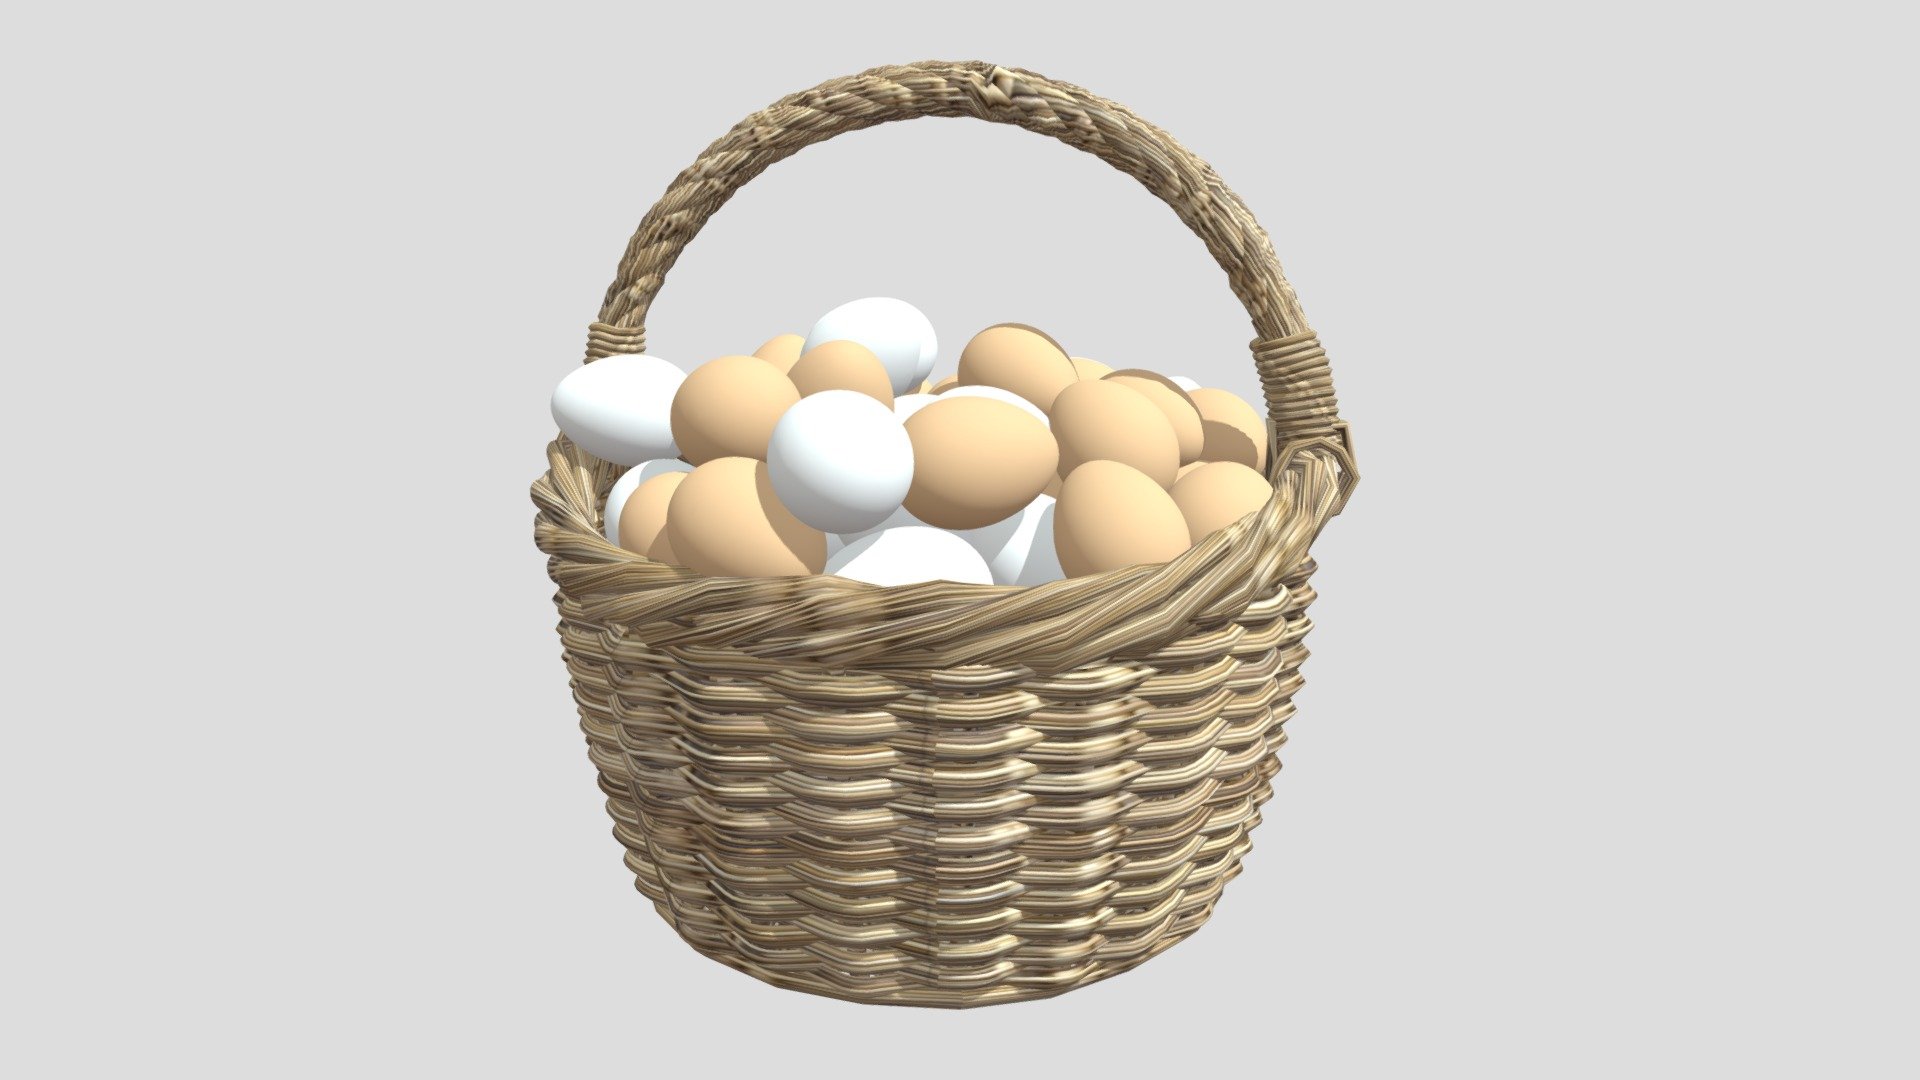 Eggbasket 3D model is a high quality, photo real model that will enhance detail and realism to any of your game projects or commercials. The model has a fully textured, detailed design that allows for close-up renders 3d model